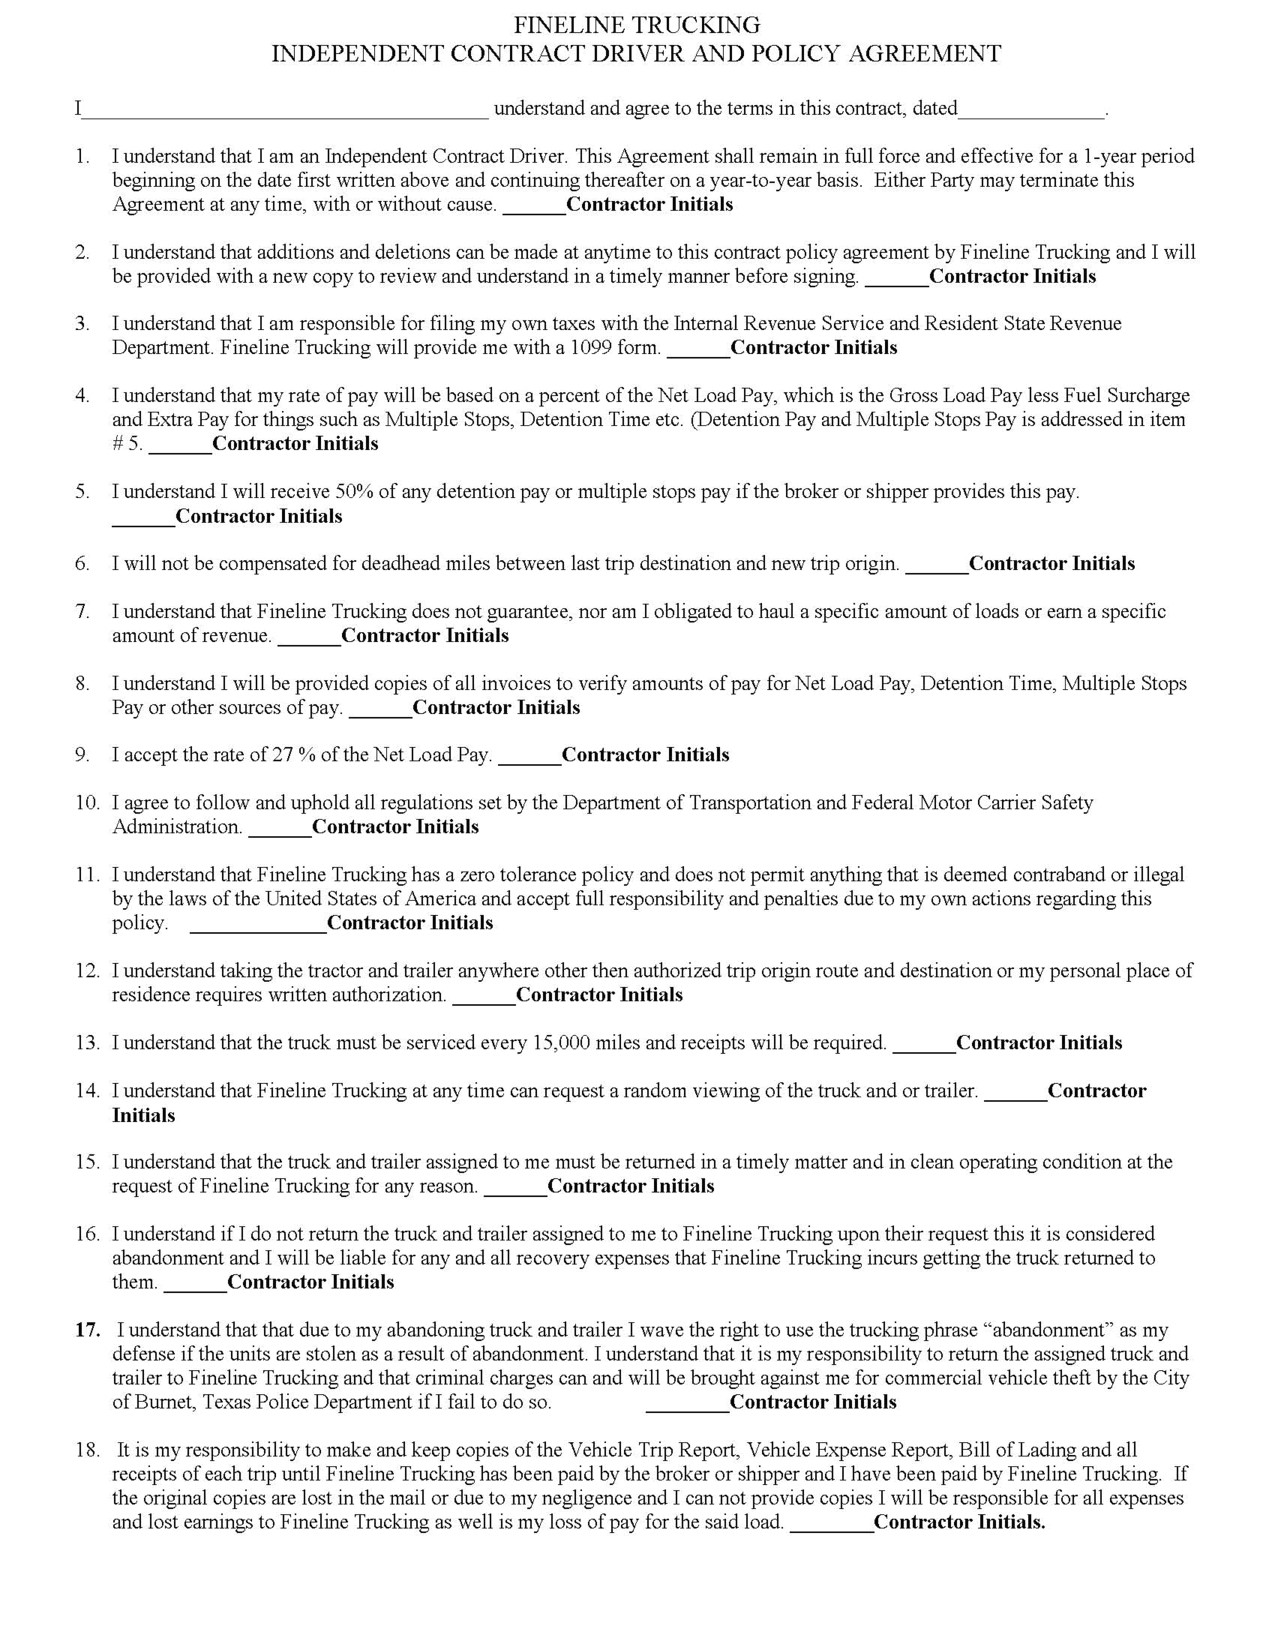 100722 truck driver contract agreement template